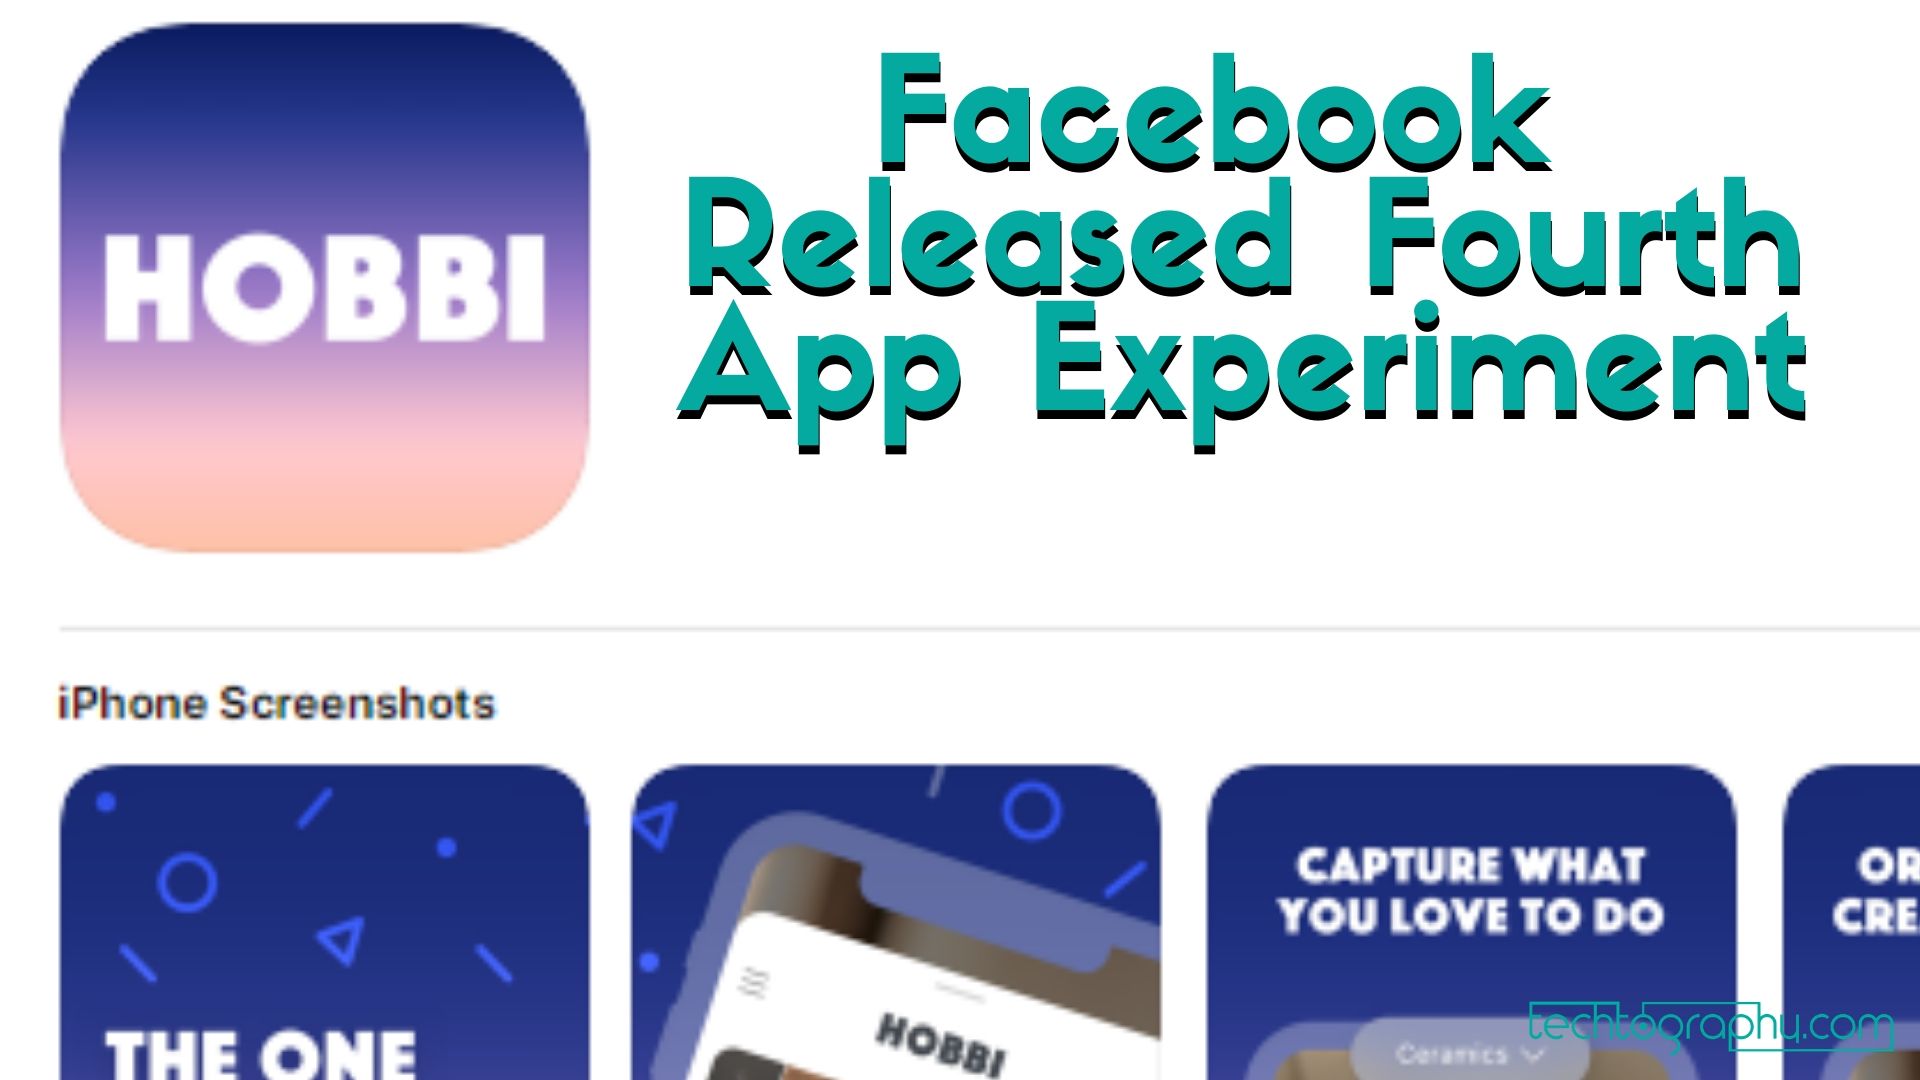 Facebook Released Fourth App Experiment